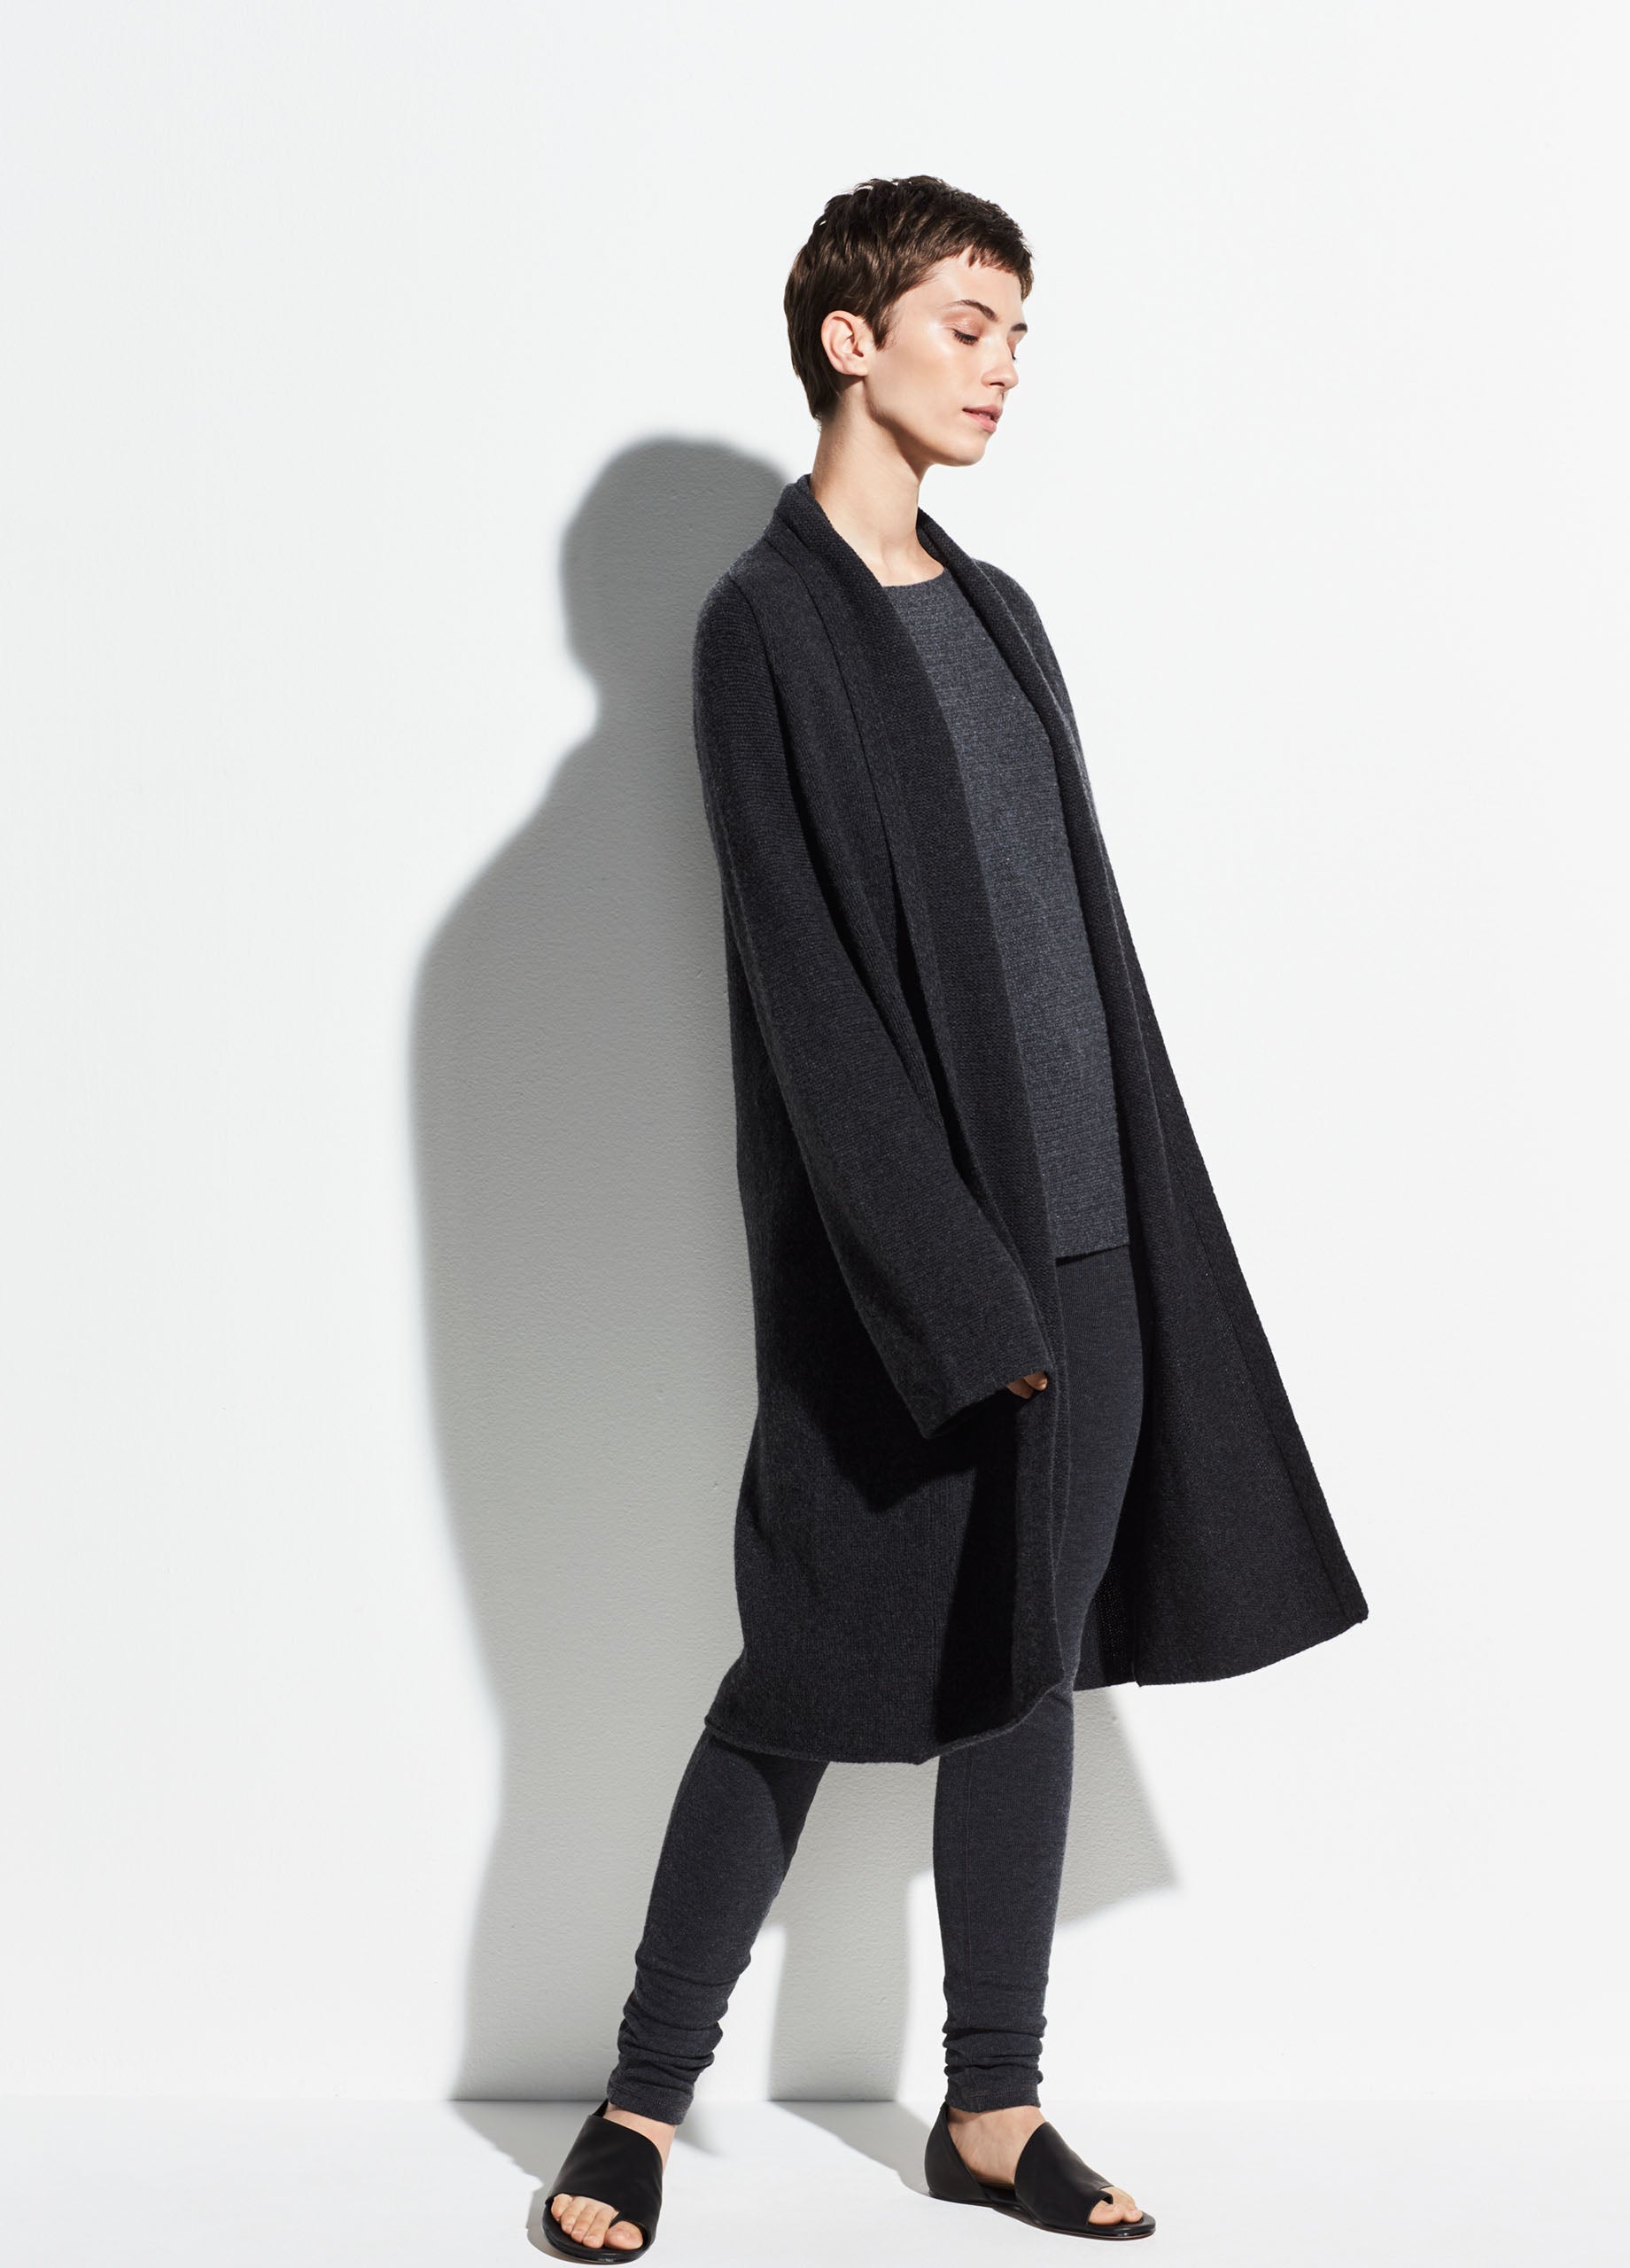 Vince | Wool Shawl Collar Cardigan in Heather Carbon | Vince Unfold